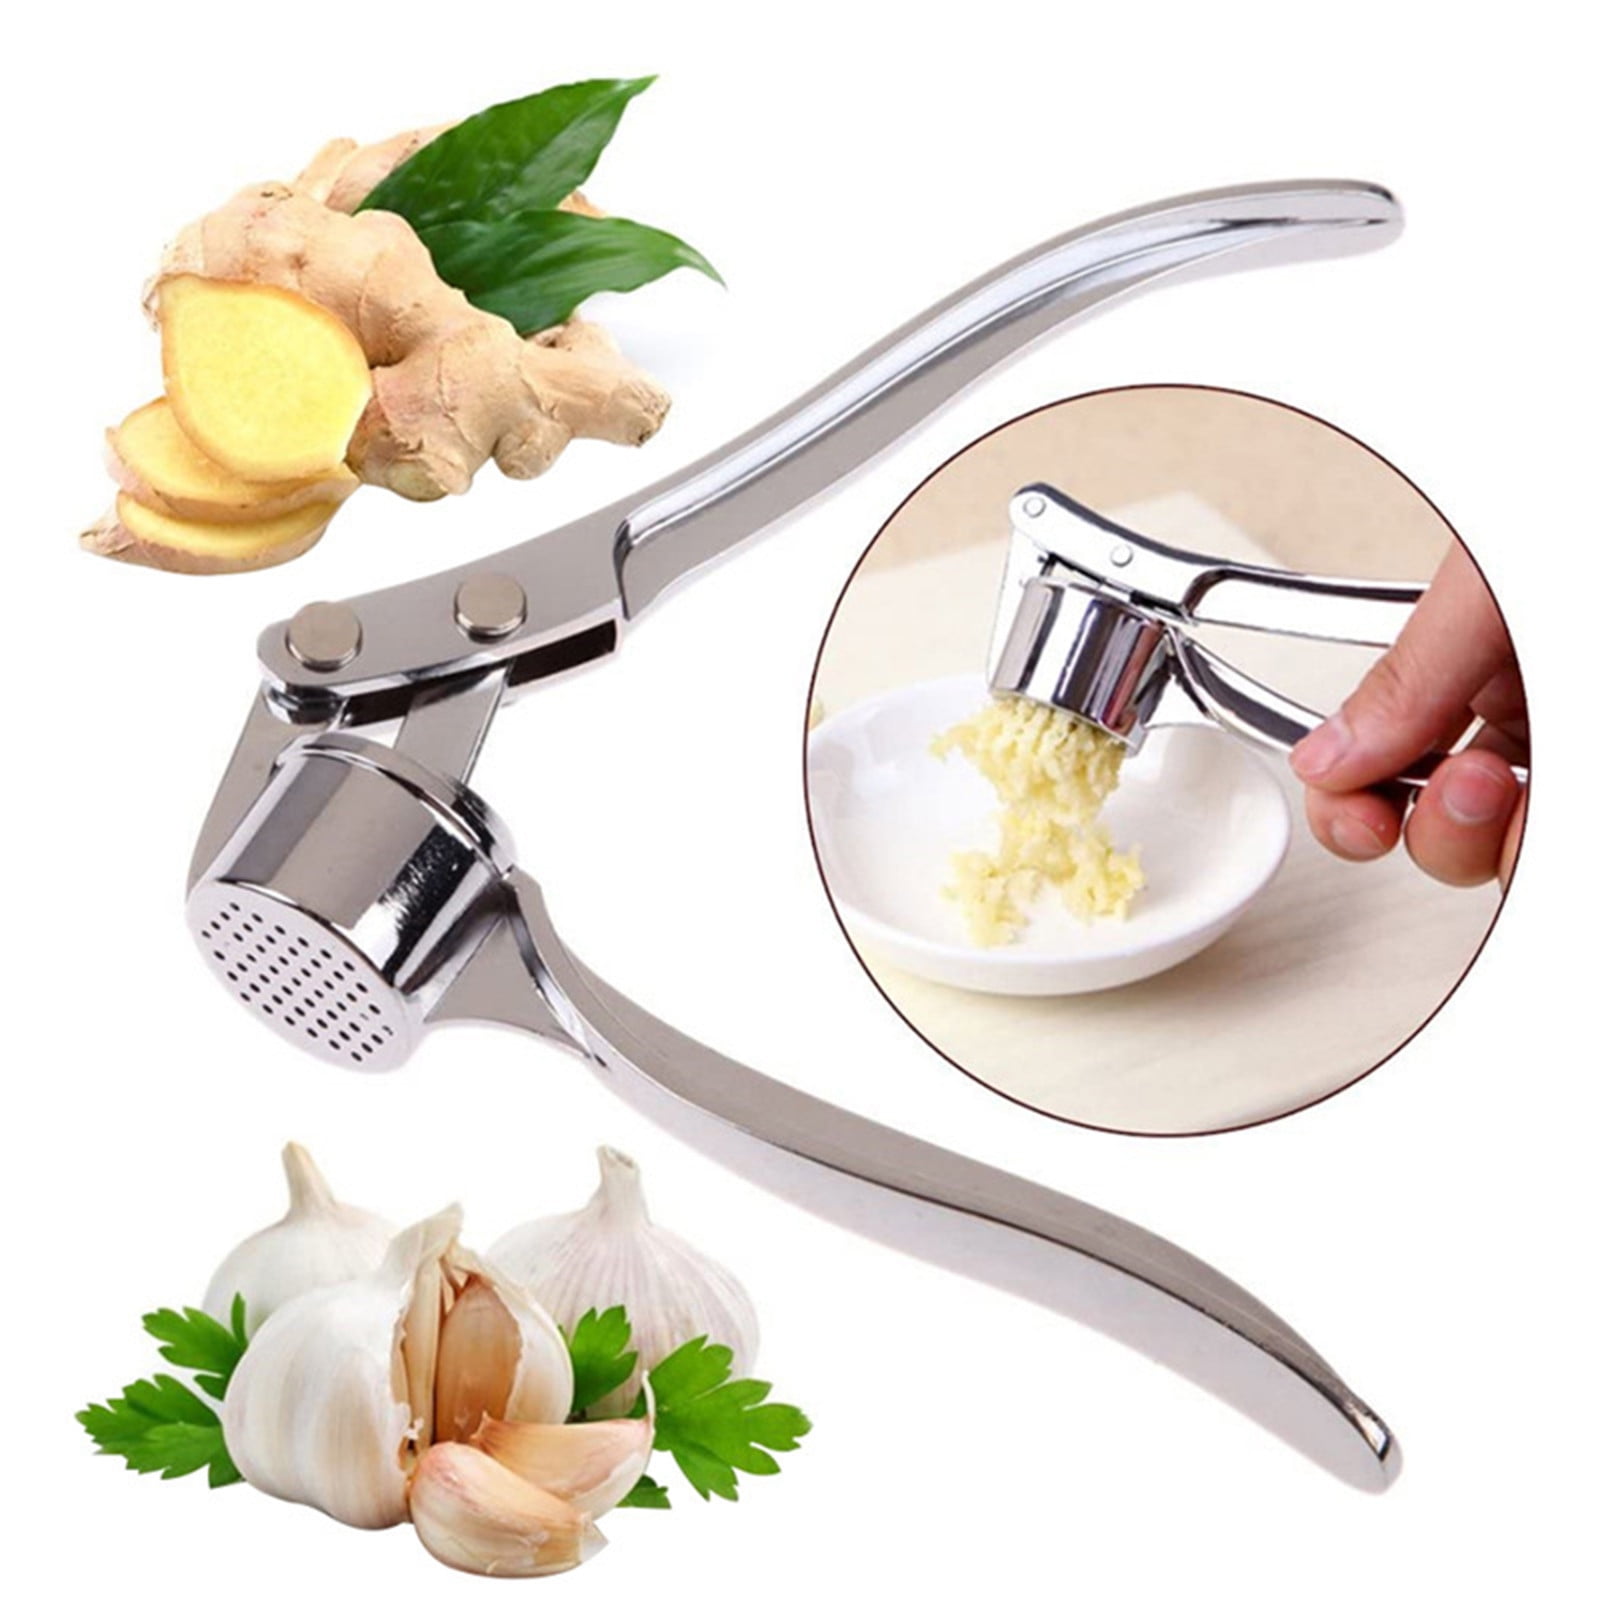 Aoibox 8.4 oz. Garlic Mincer Tool with Sturdy Design Extracts More Garlic Paste, Soft and Easy to Squeeze, Elegant Black